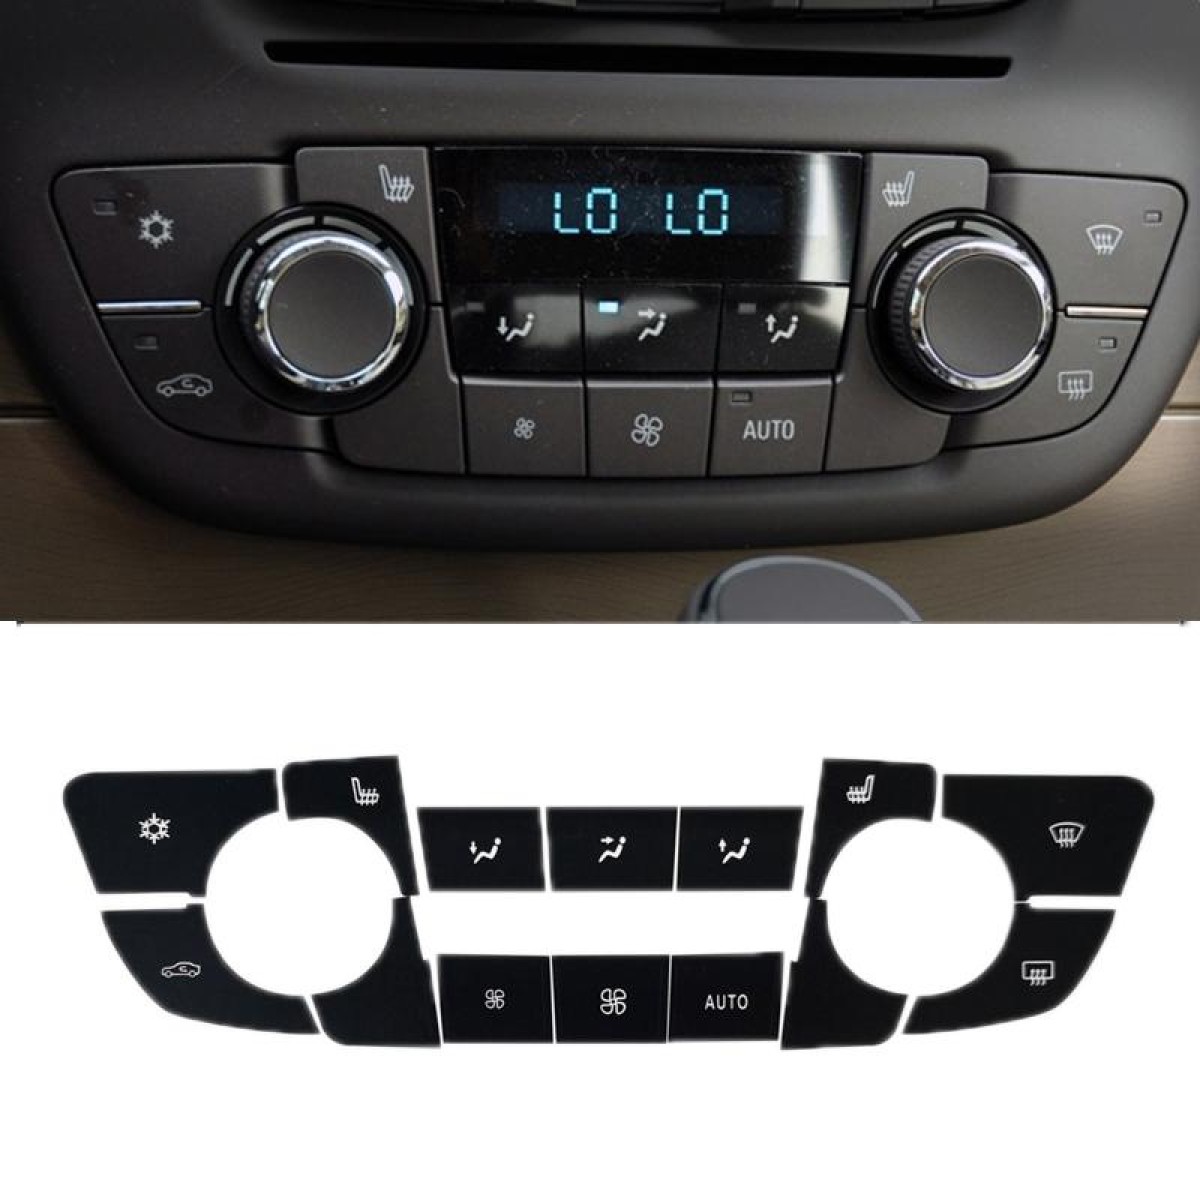 For Buick Regal 2008-2013 Air Conditioning Central Control Button Repair Sticker